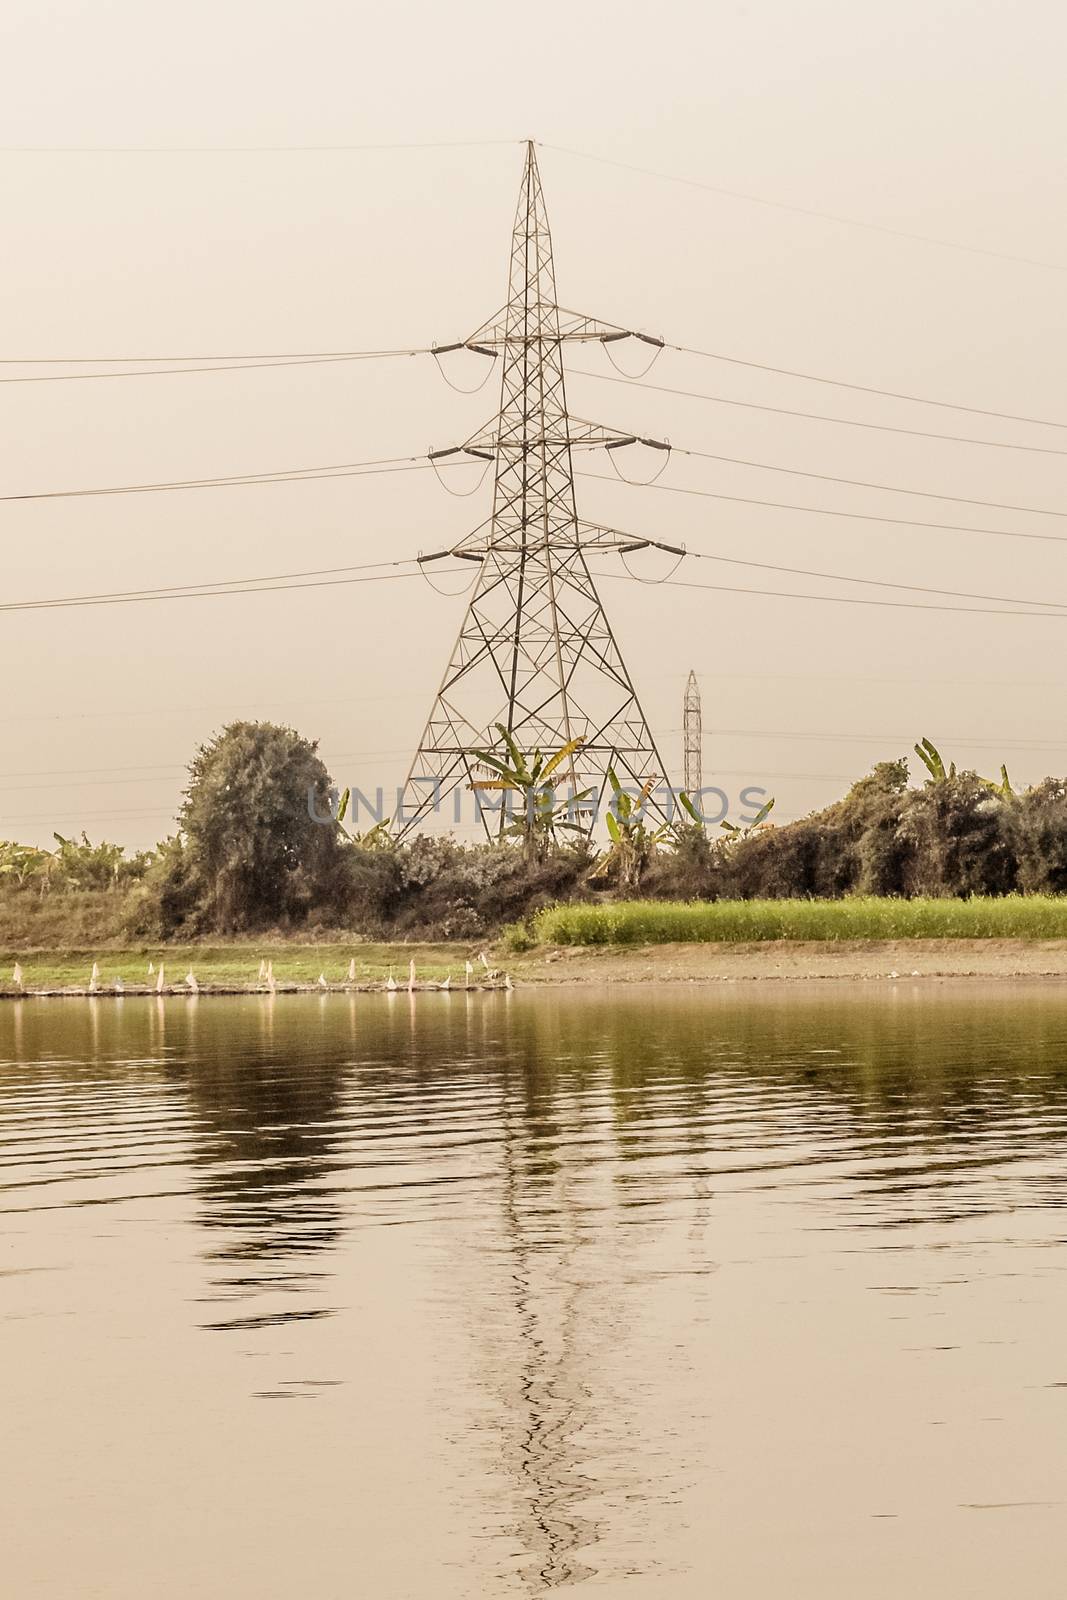 A transmission tower or power tower (electricity pylon or electric pylon in the United Kingdom, Canada and parts of Europe) tall structure, a steel lattice tower, used to support overhead power line.